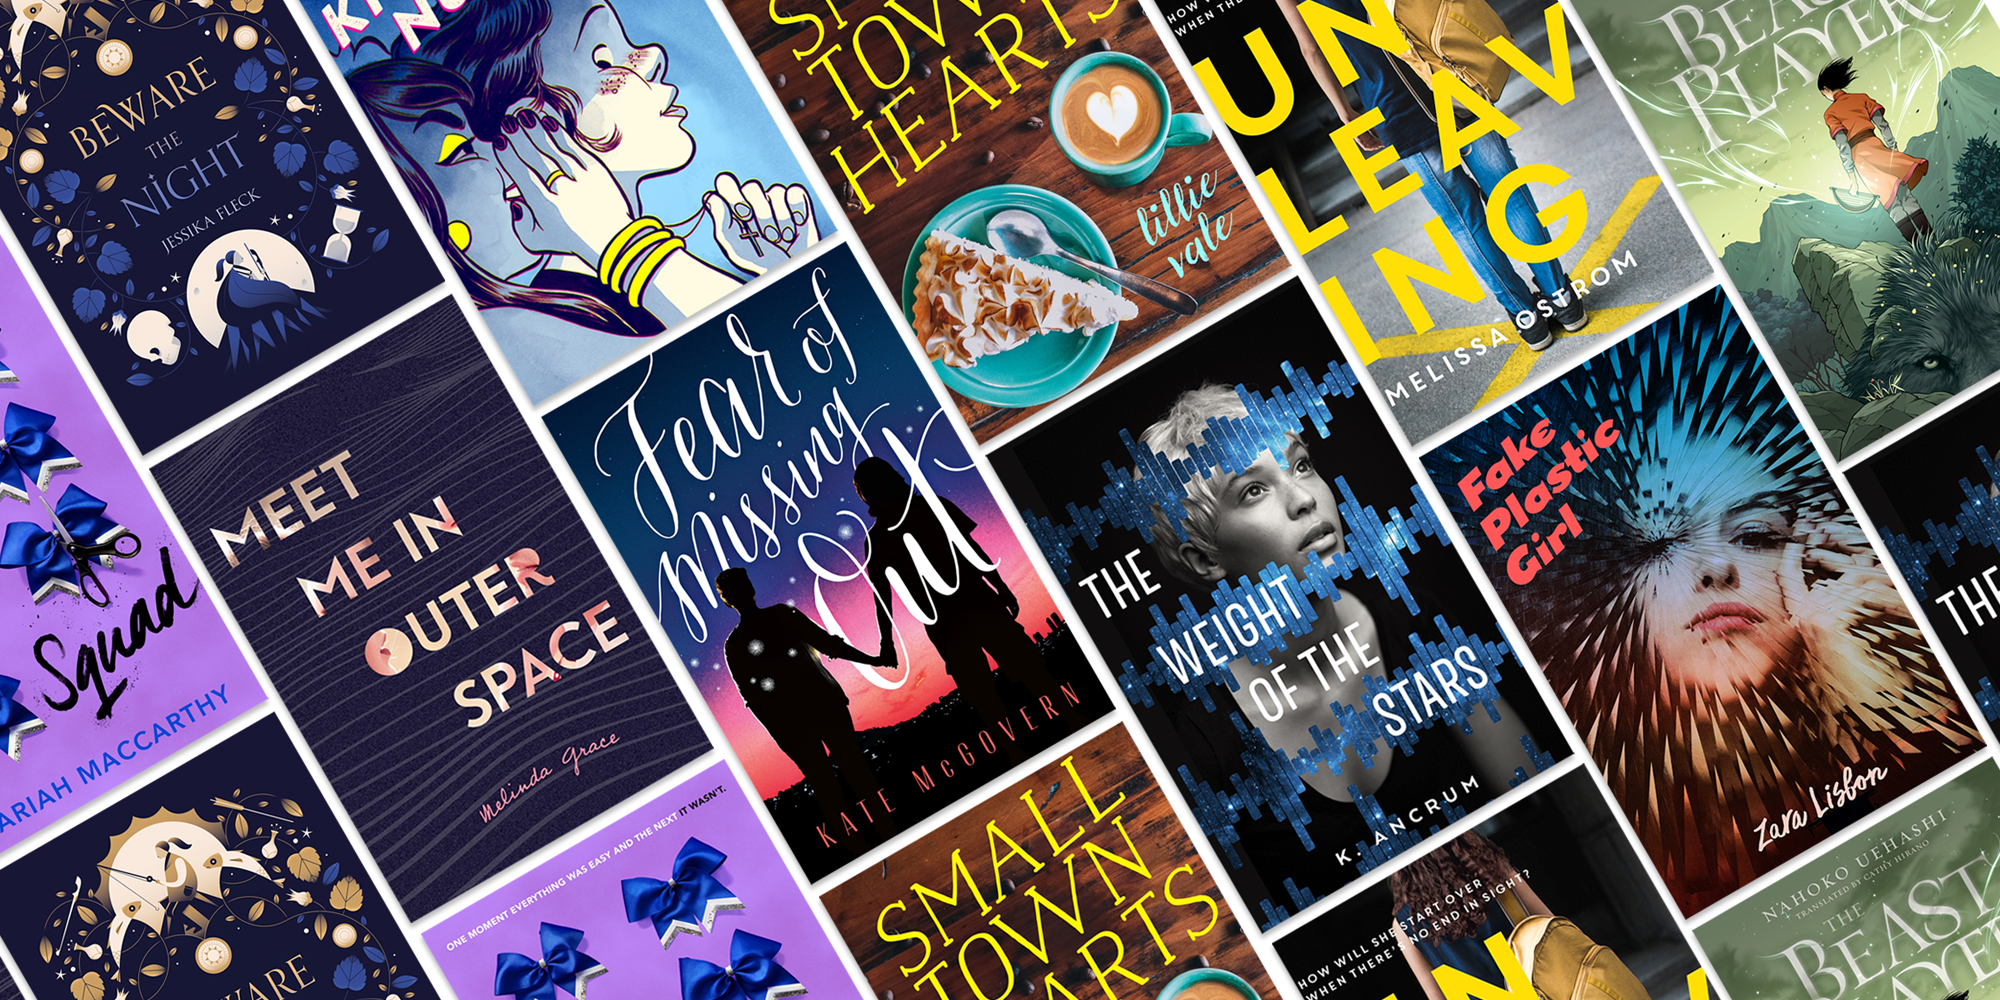 10 New Books For the Top of Every March TBR